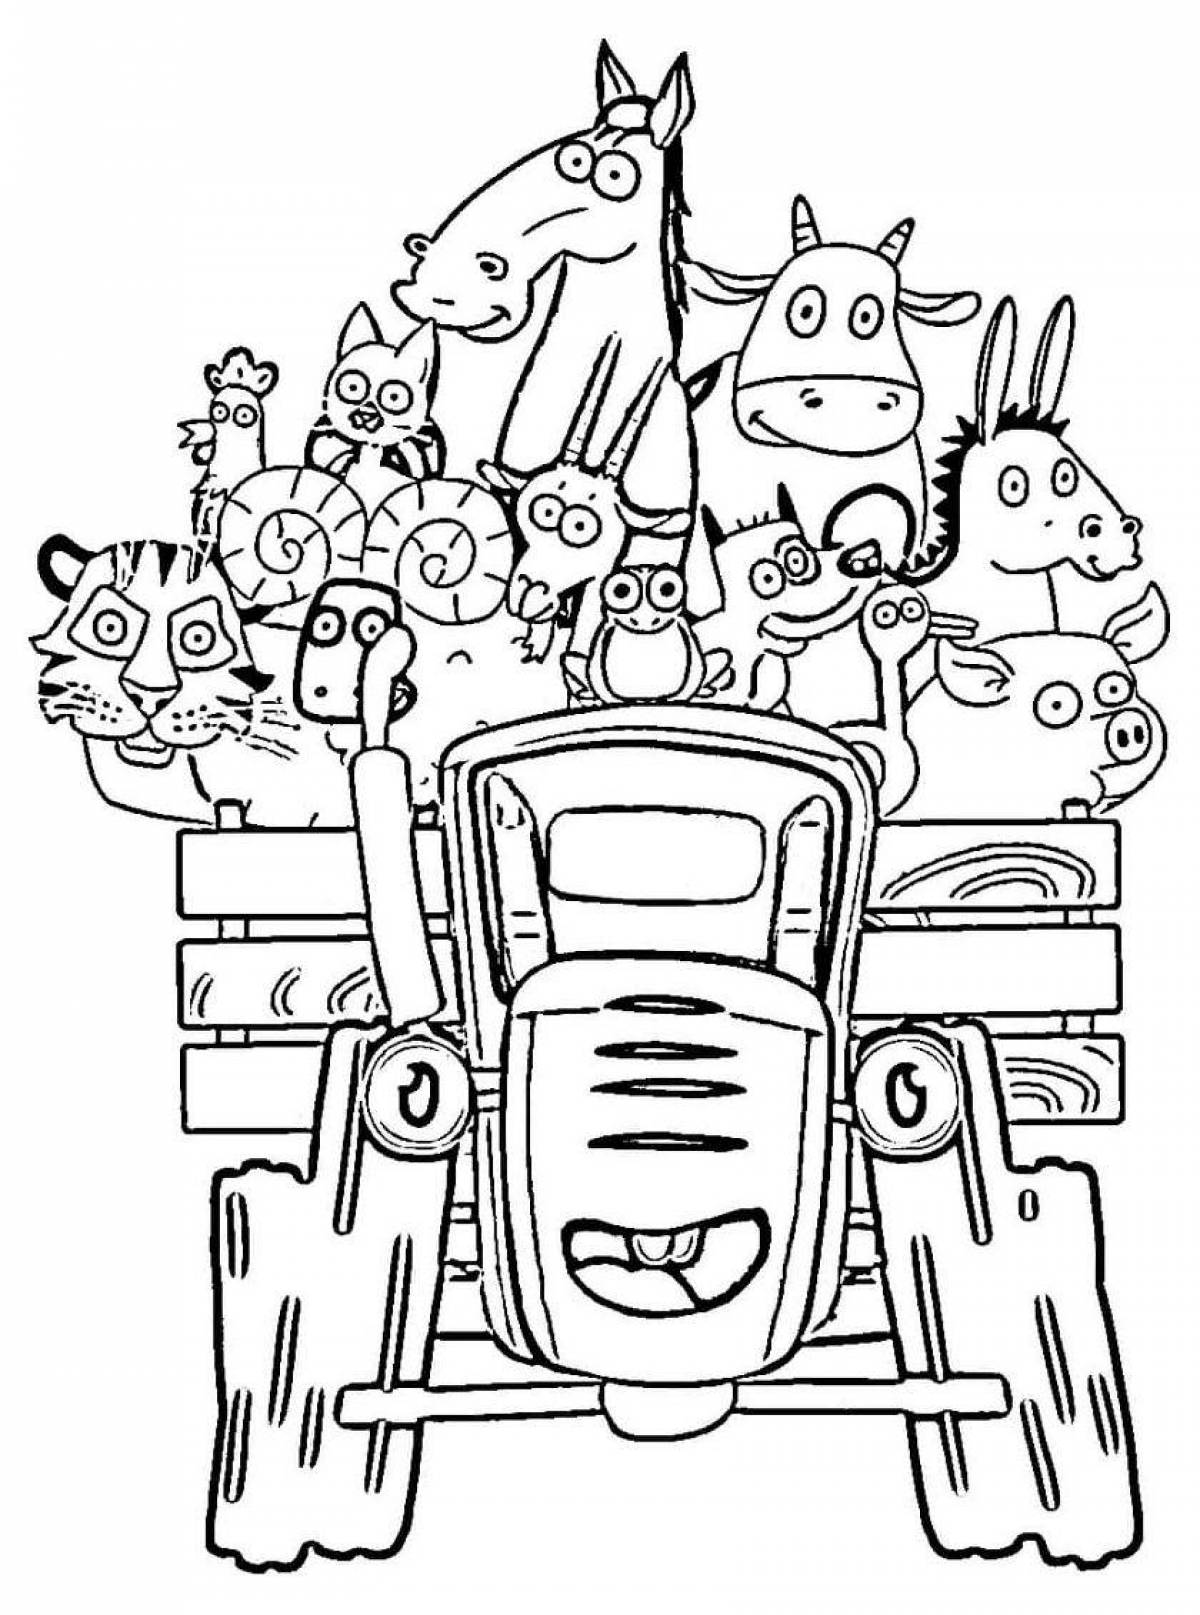 Attractive house blue tractor coloring book